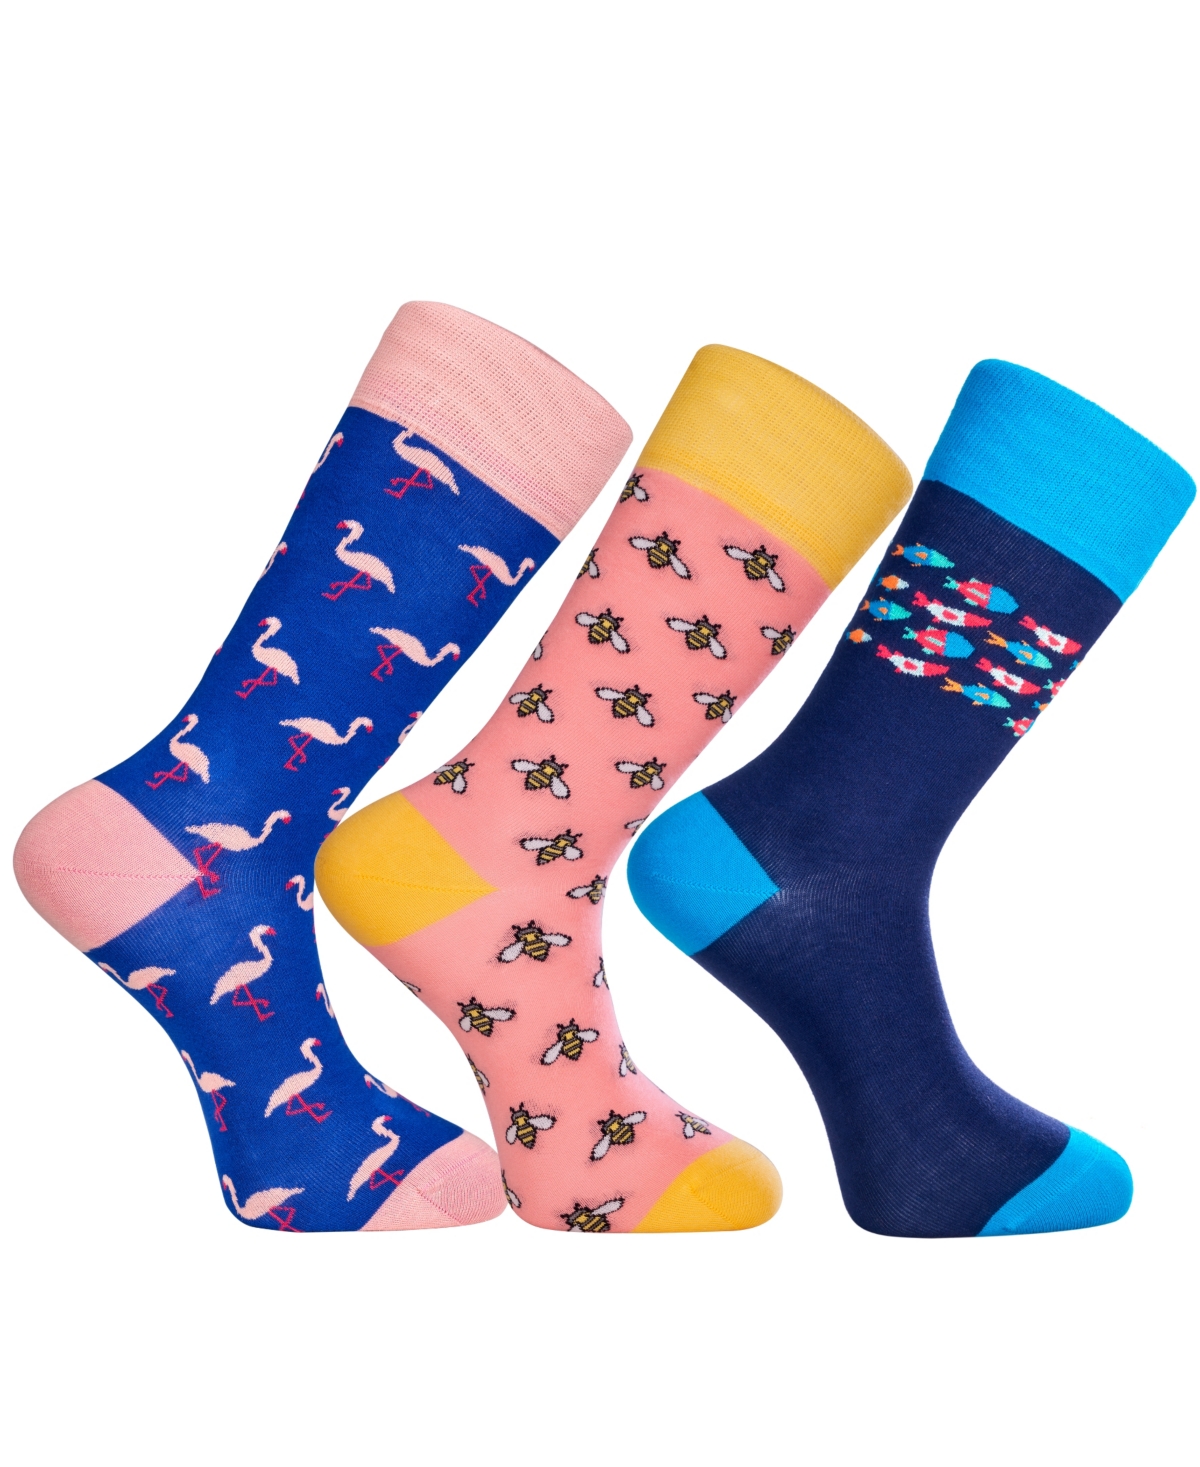 Love Sock Company Men's Hawaii Novelty Luxury Crew Socks Bundle Fun Colorful With Seamless Toe Design, Pack Of 3 In Multi Color